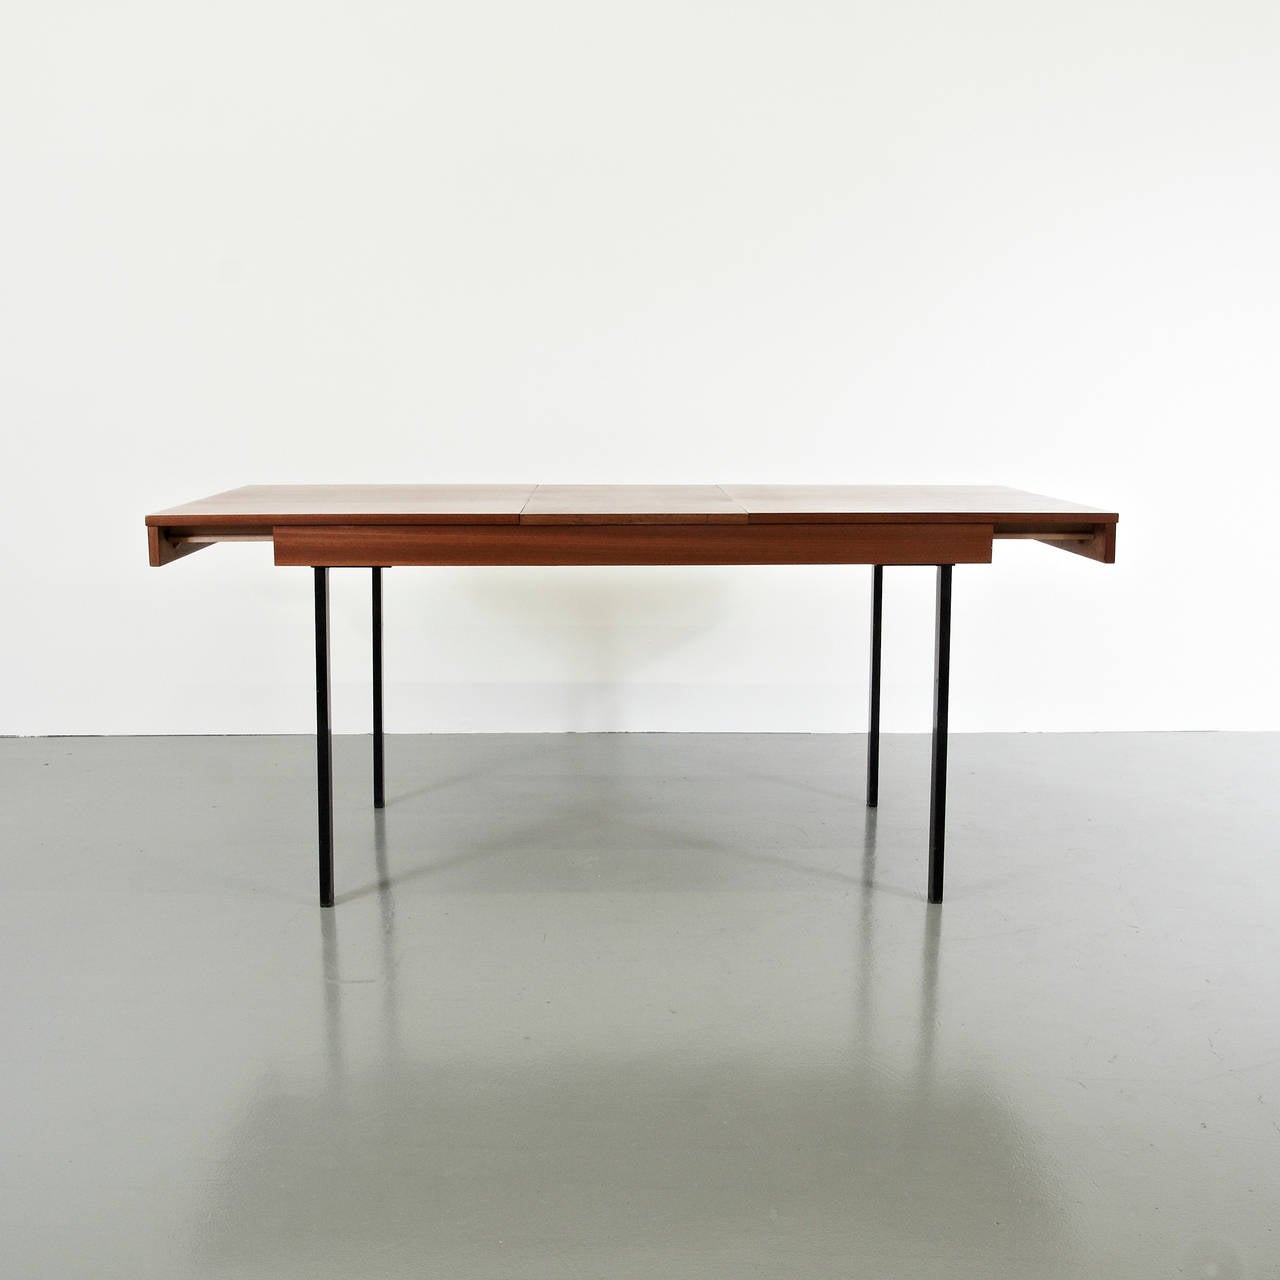 Adjustable Extension Dinning Table designed by Pierre Guariche.
Manufactured by Meurop (France) around 1950.
Bent and painted iron frame, wood table top.

In good original condition, with minor wear consistent with age and use, preserving a nice